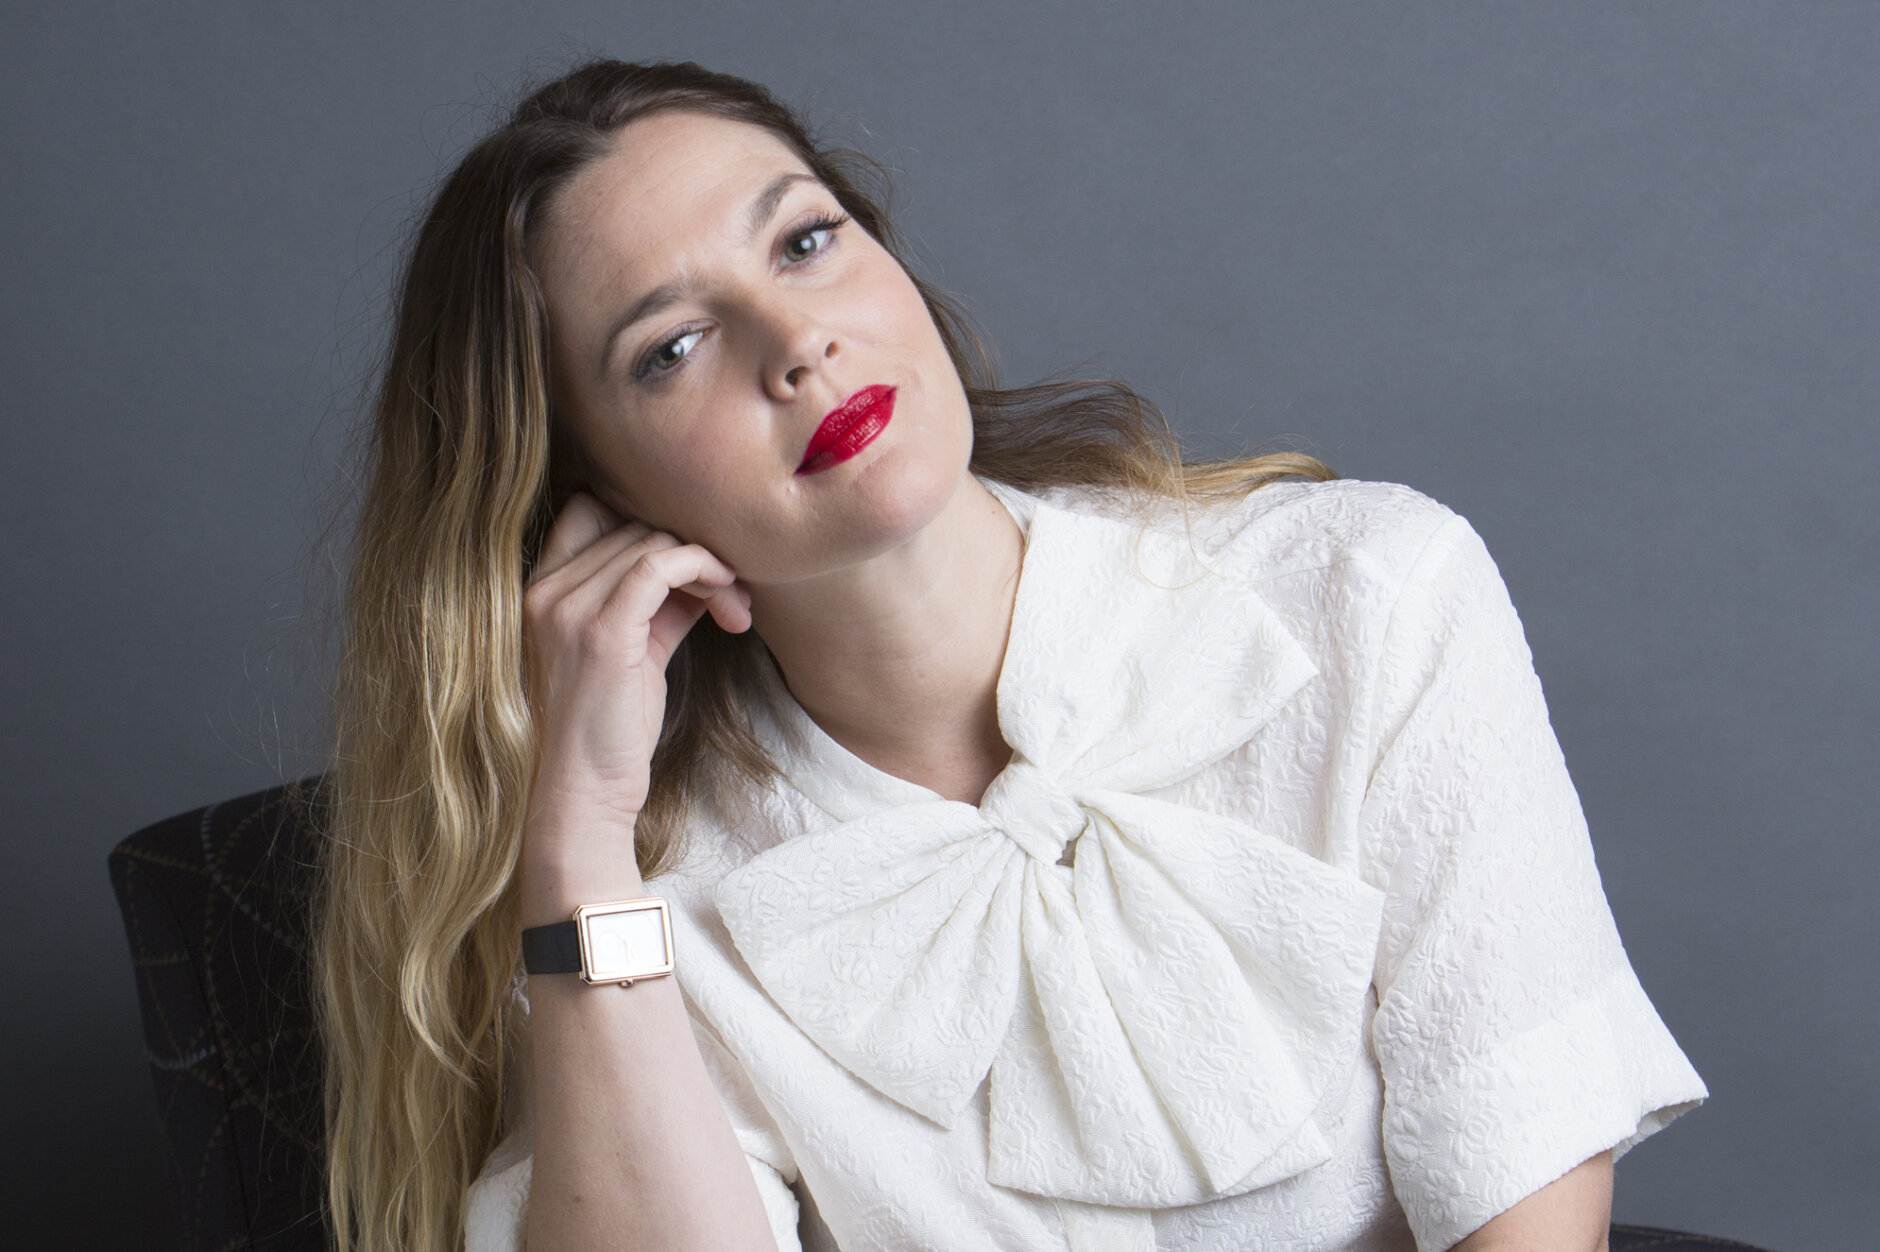 In this Oct. 20, 2015 photo, Drew Barrymore poses for a portrait to promote her new book "Wildflower," in New York. Barrymore has a new movie, "Miss You Already," with Tony Collette opening Nov. 6,  a beauty line called Flower and runs a production company called Flower Films.  (Photo by Amy Sussman/Invision/AP)